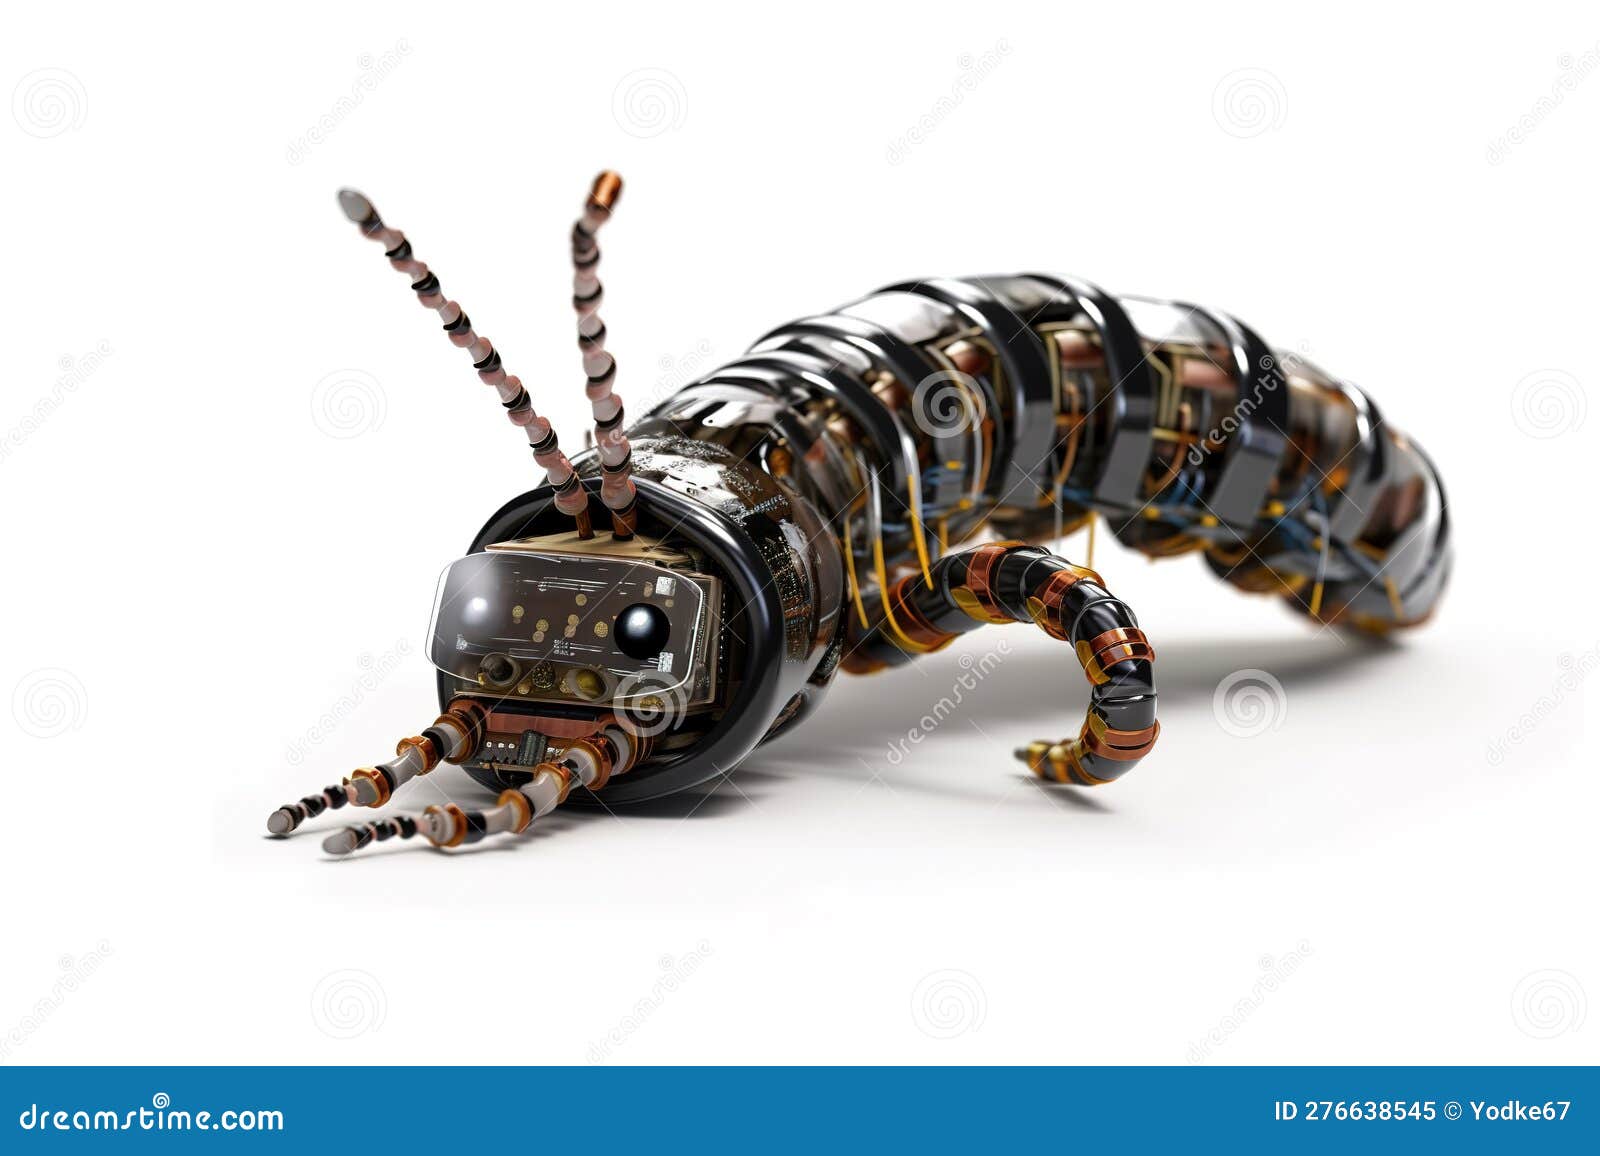 Image of a Worm Modified into a Robot on a White Background. Wild Animal  Stock Illustration - Illustration of earth, industrial: 276638545